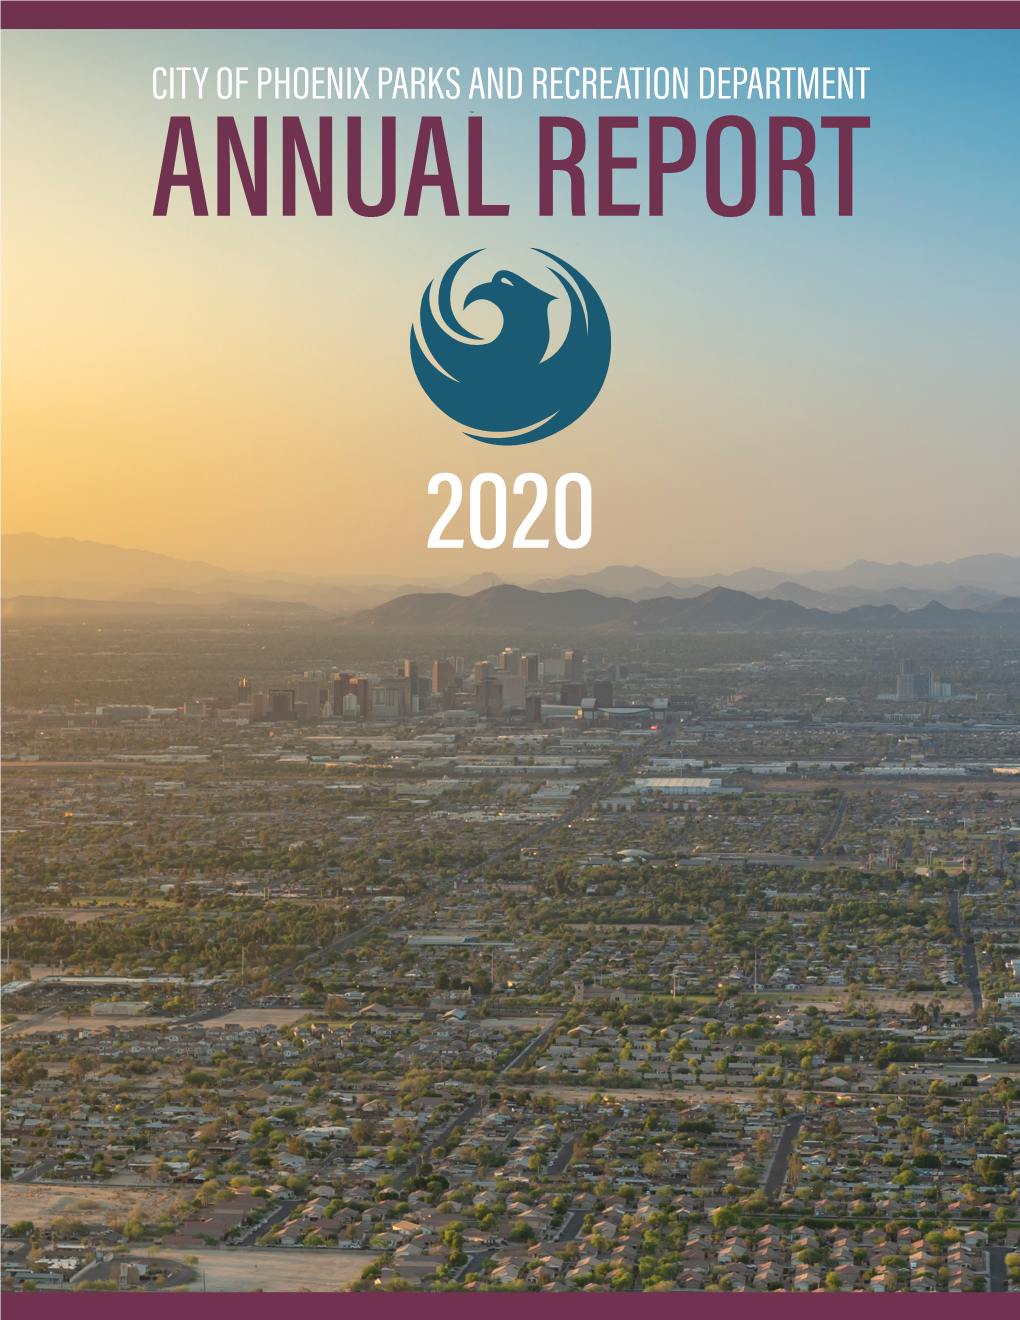 City of Phoenix Parks and Recreation Department Annual Report